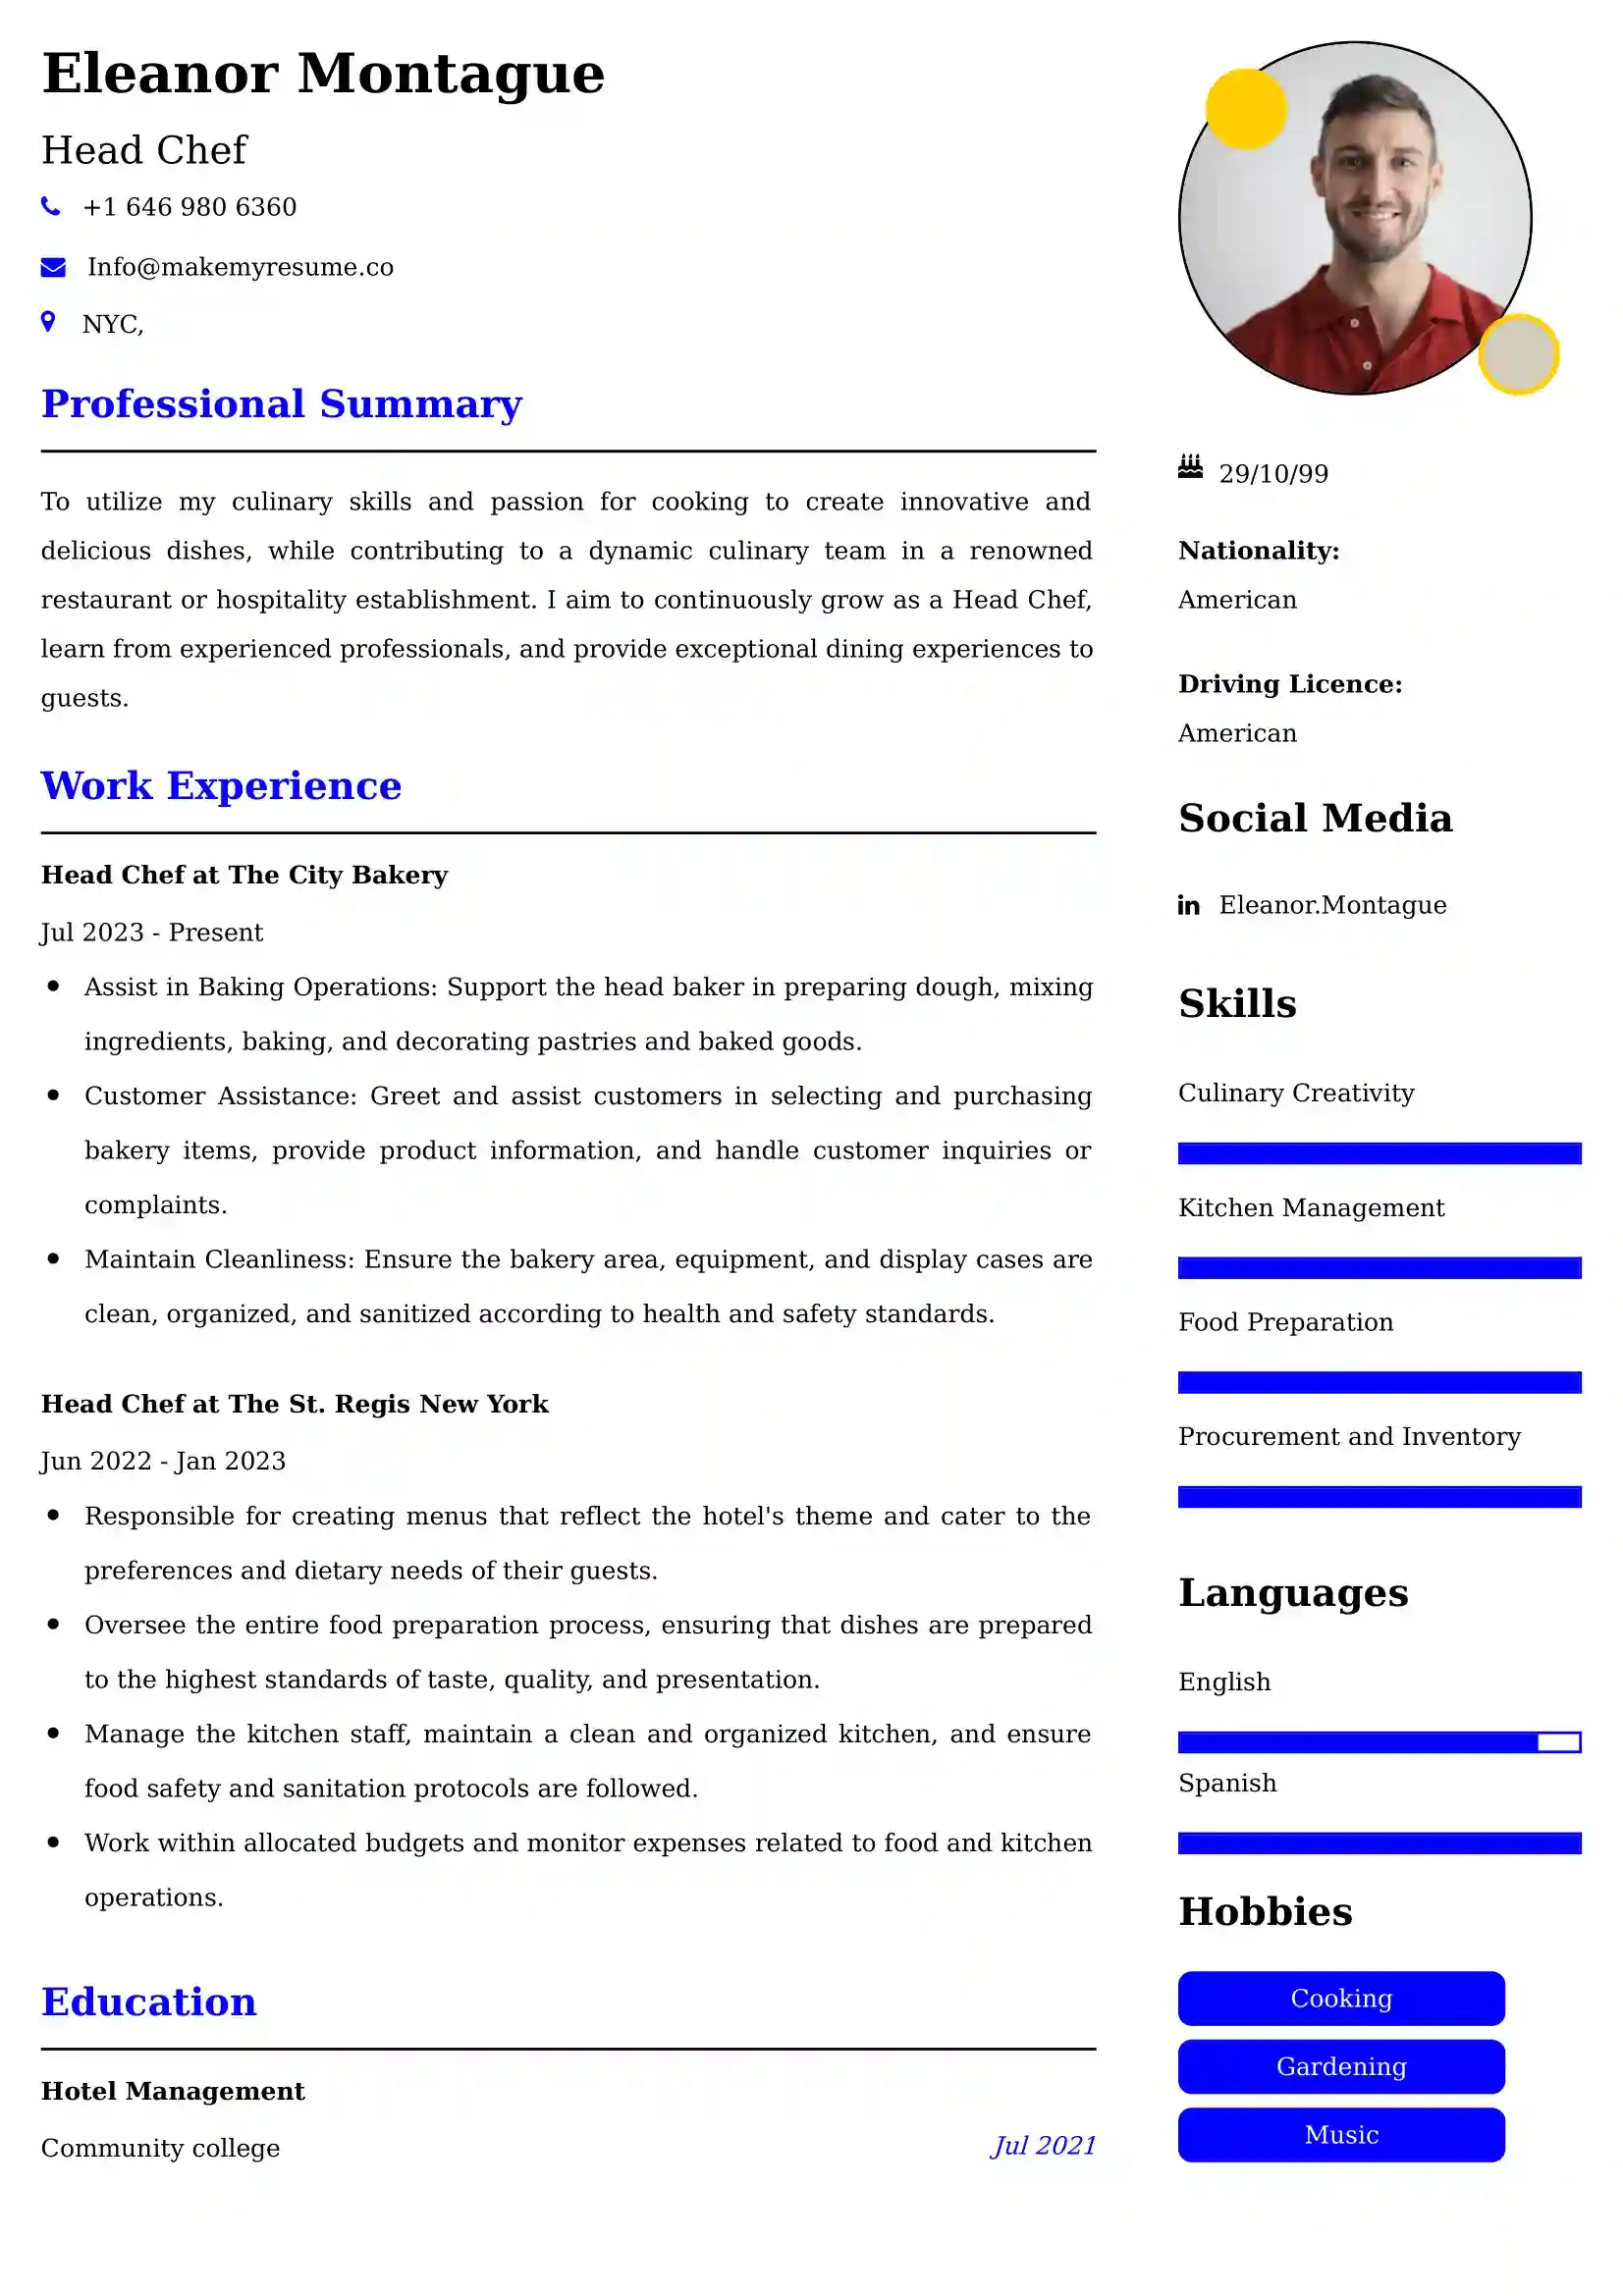 Head Chef Resume Examples for UAE